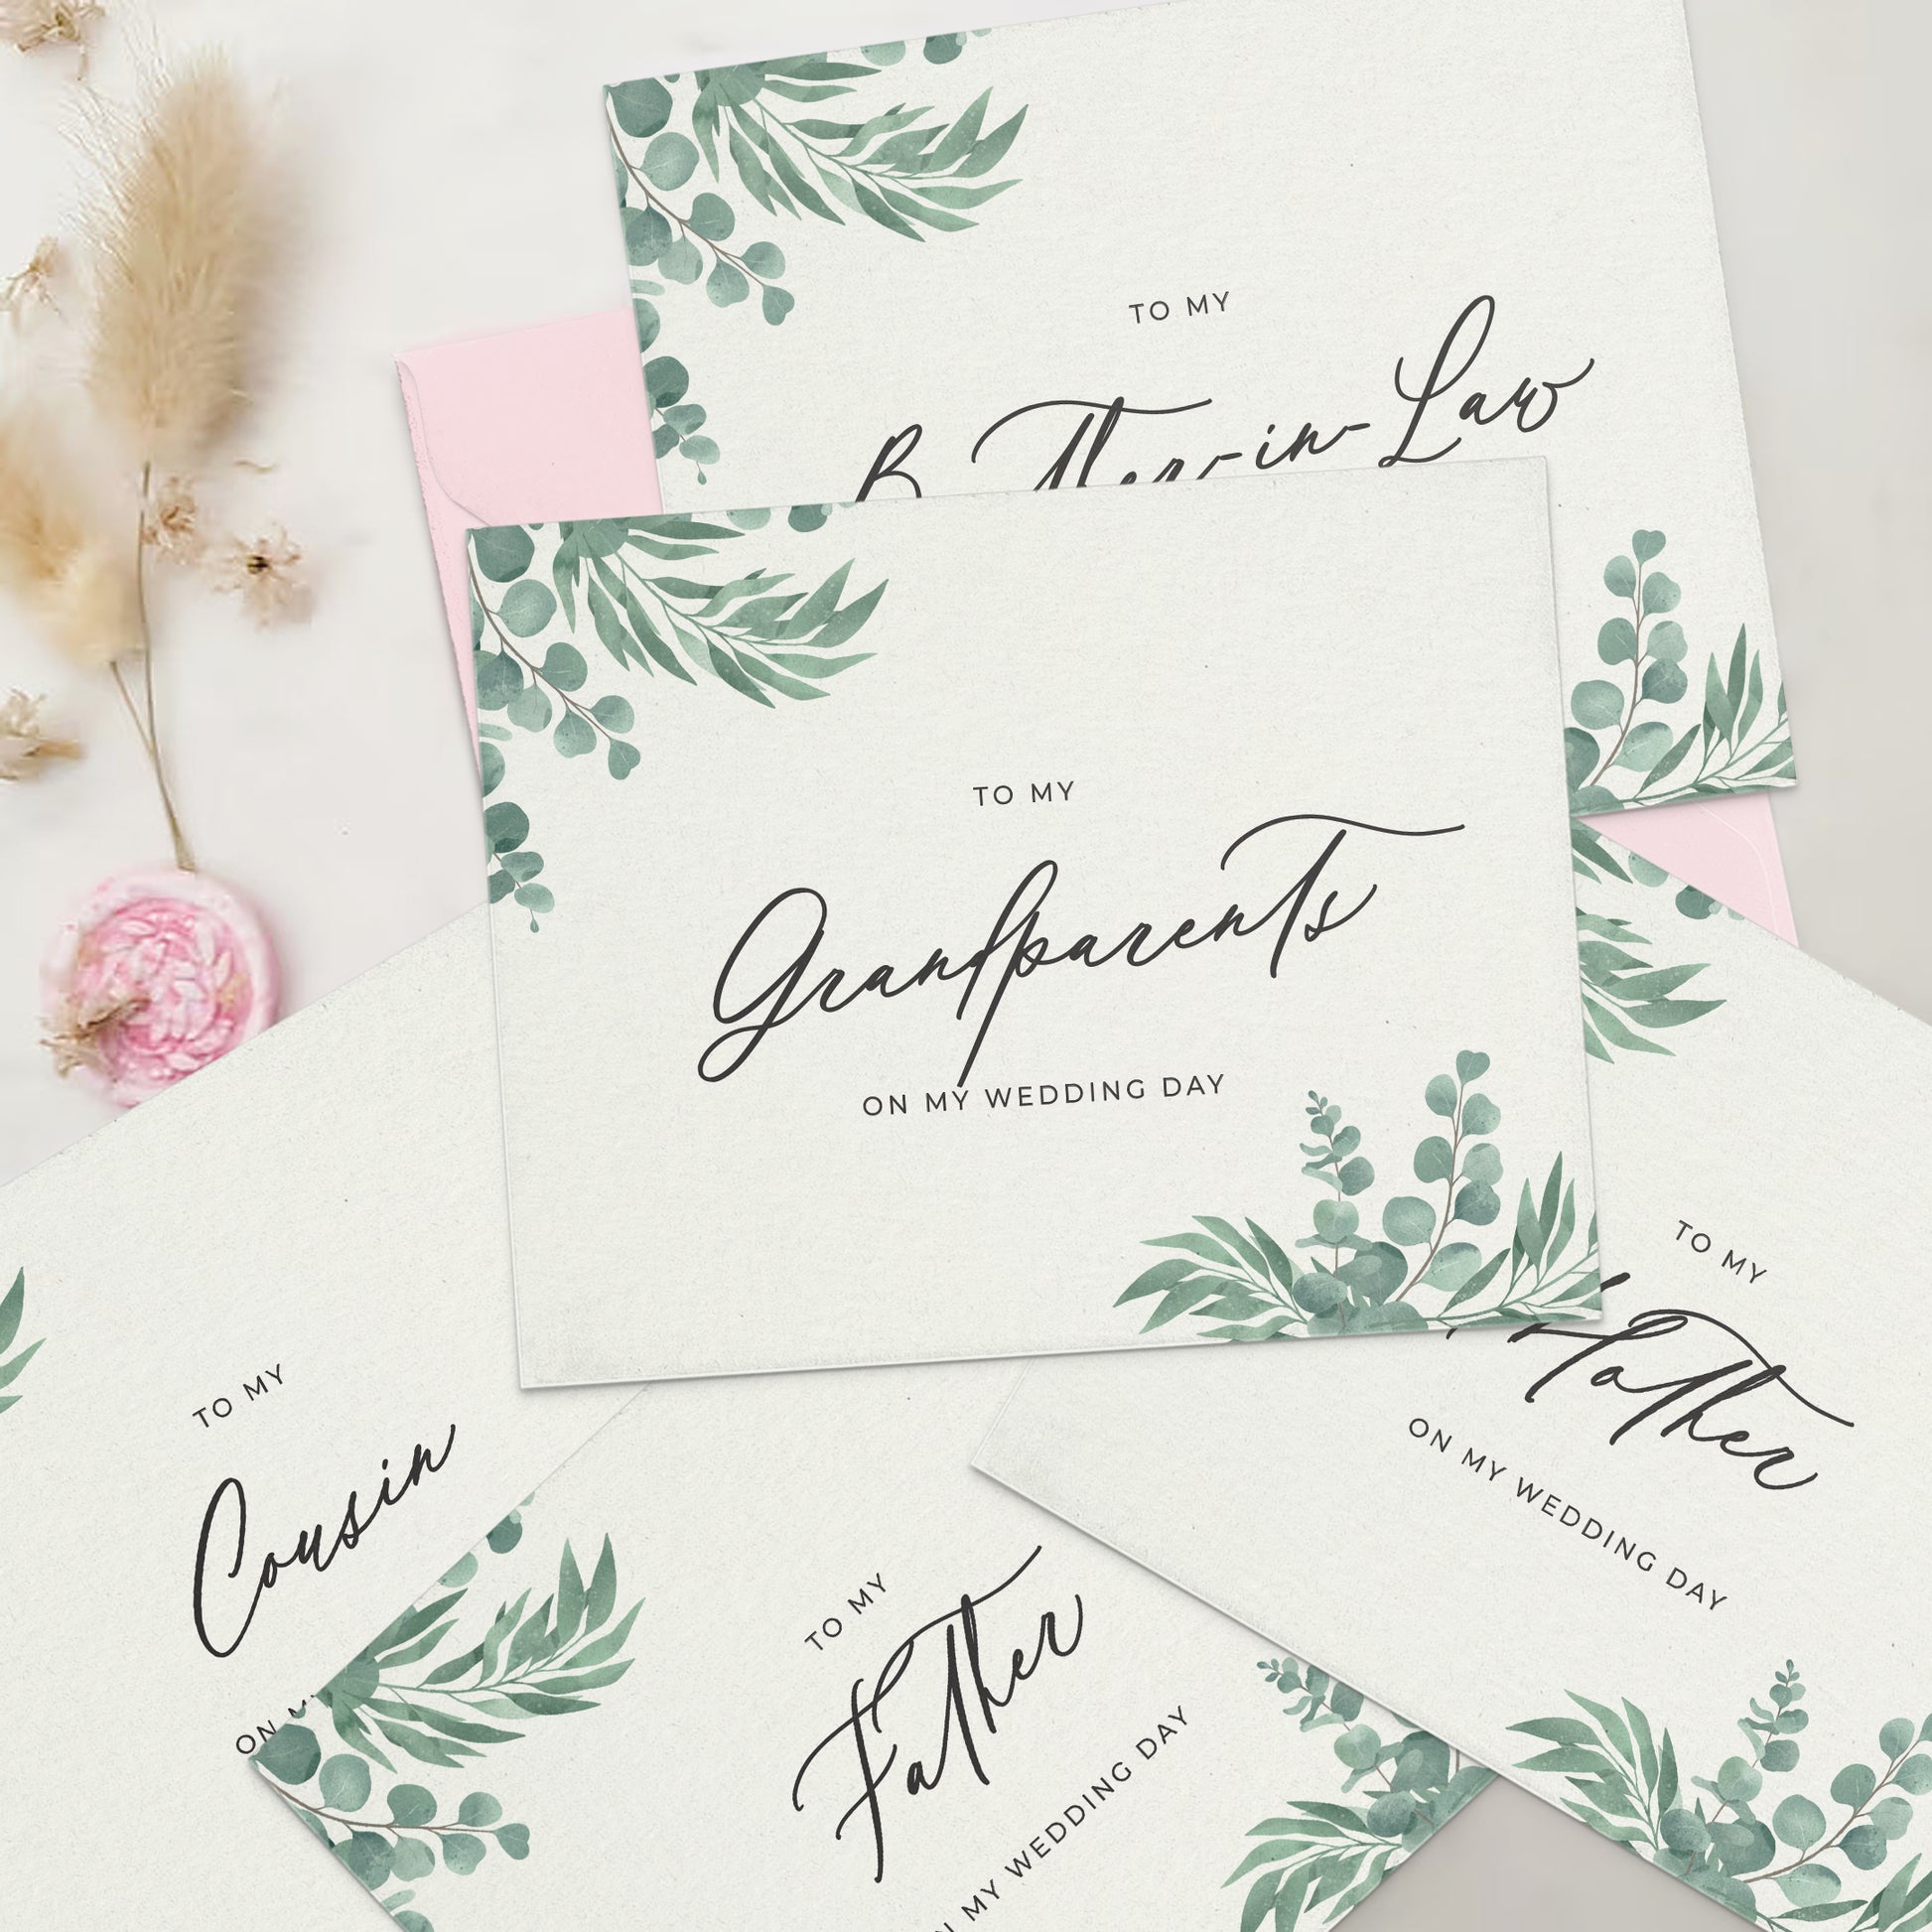 “To my… on my wedding day” note cards collection in greenery design with eucalyptus leaves and calligraphy font from XOXOKristen.